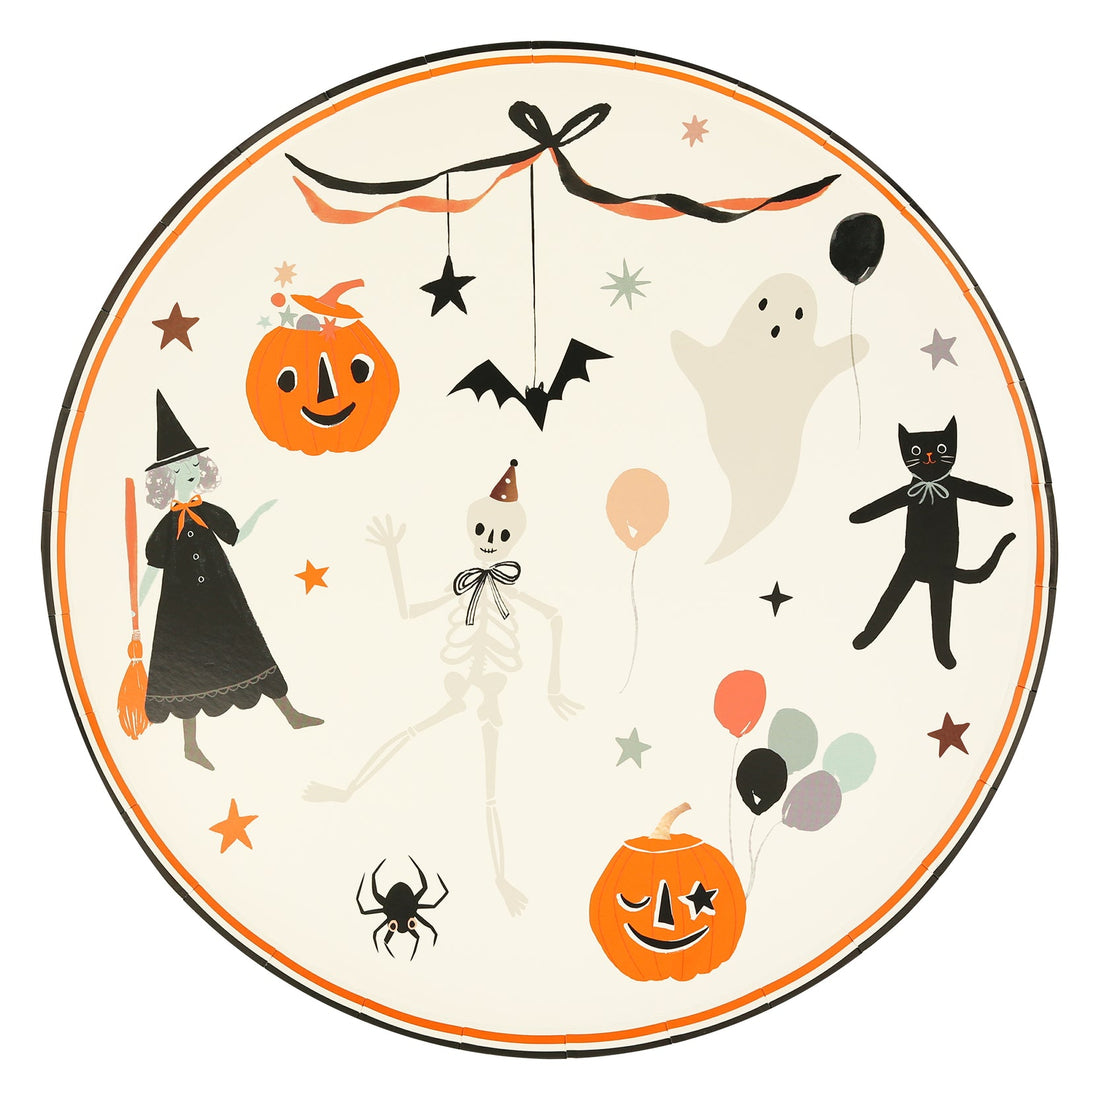 Halloween vintage-look plates, featuring happy Halloween icons and an on-trend bow design